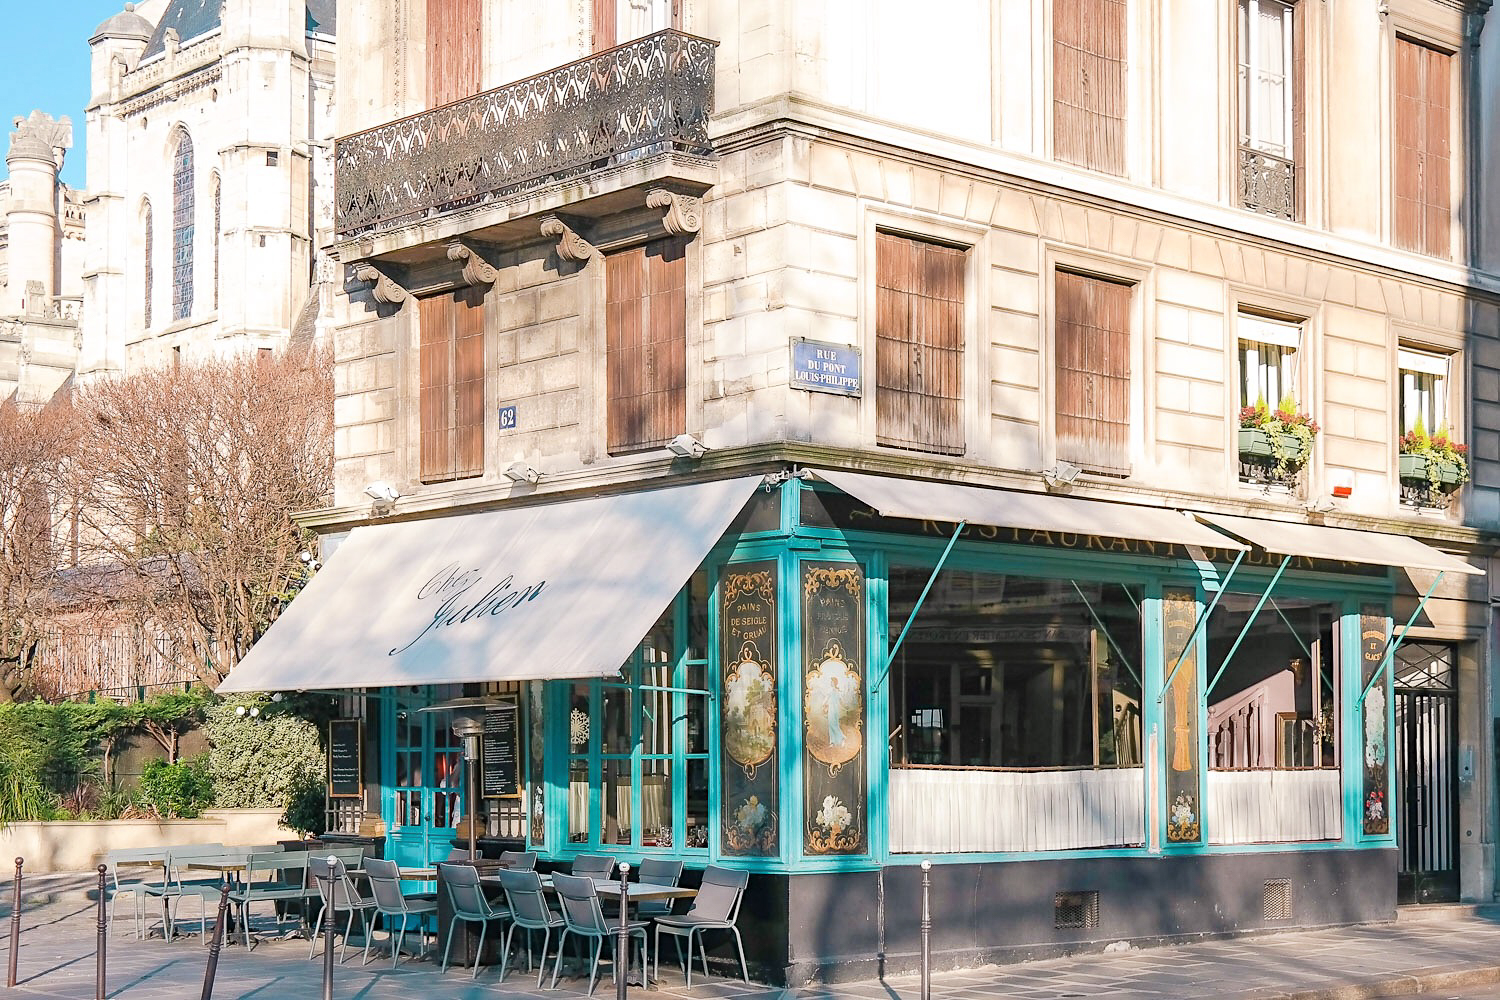 25 Photos of Paris in Winter That Prove it Really is Always a Good Idea ...